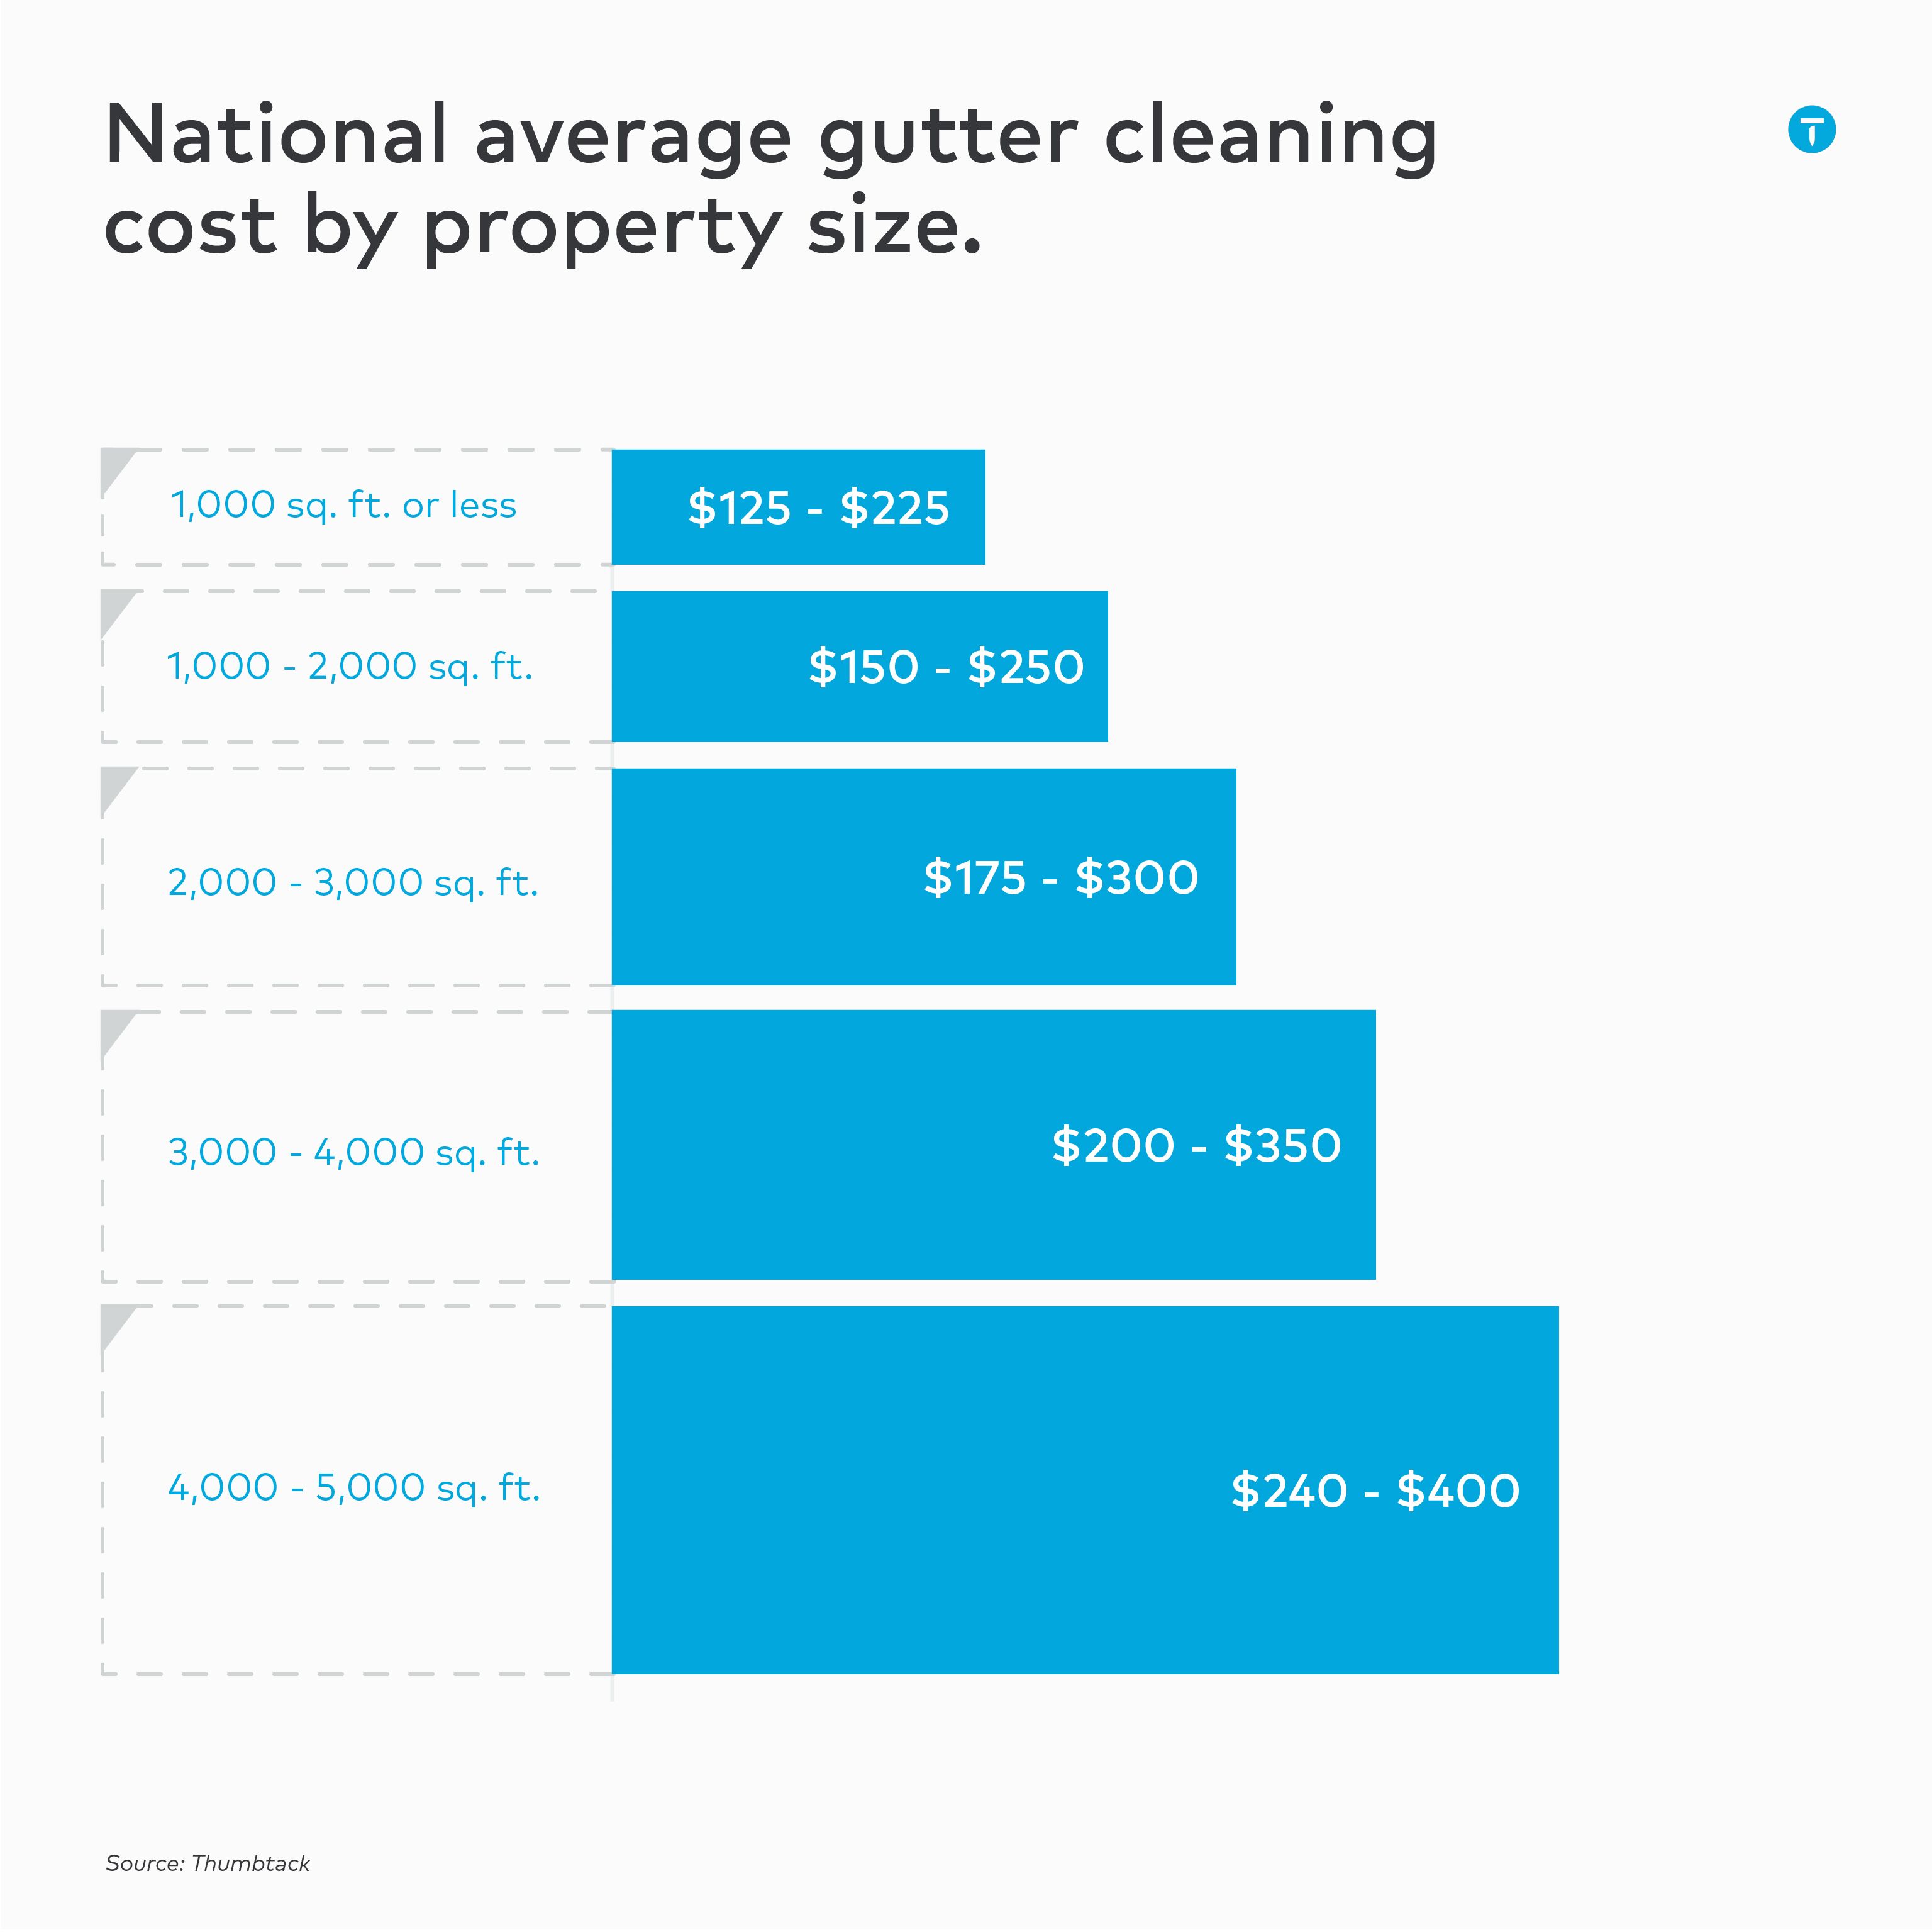 average gutter cleaning prices by property size